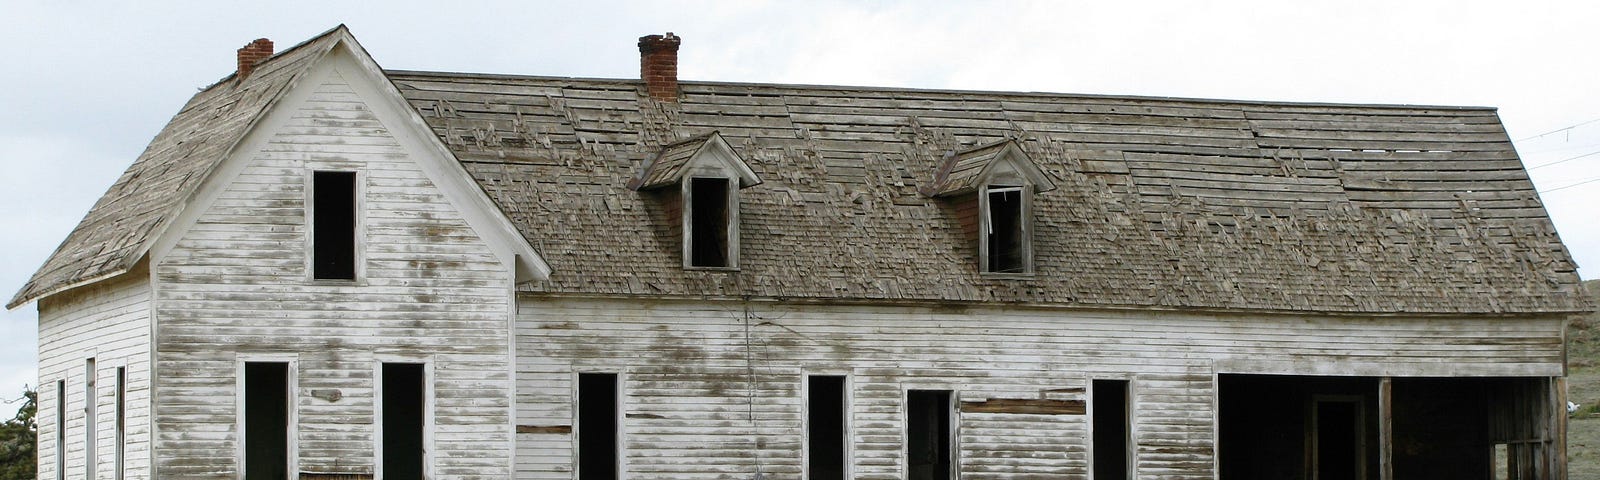 An abandoned looking farmhouse